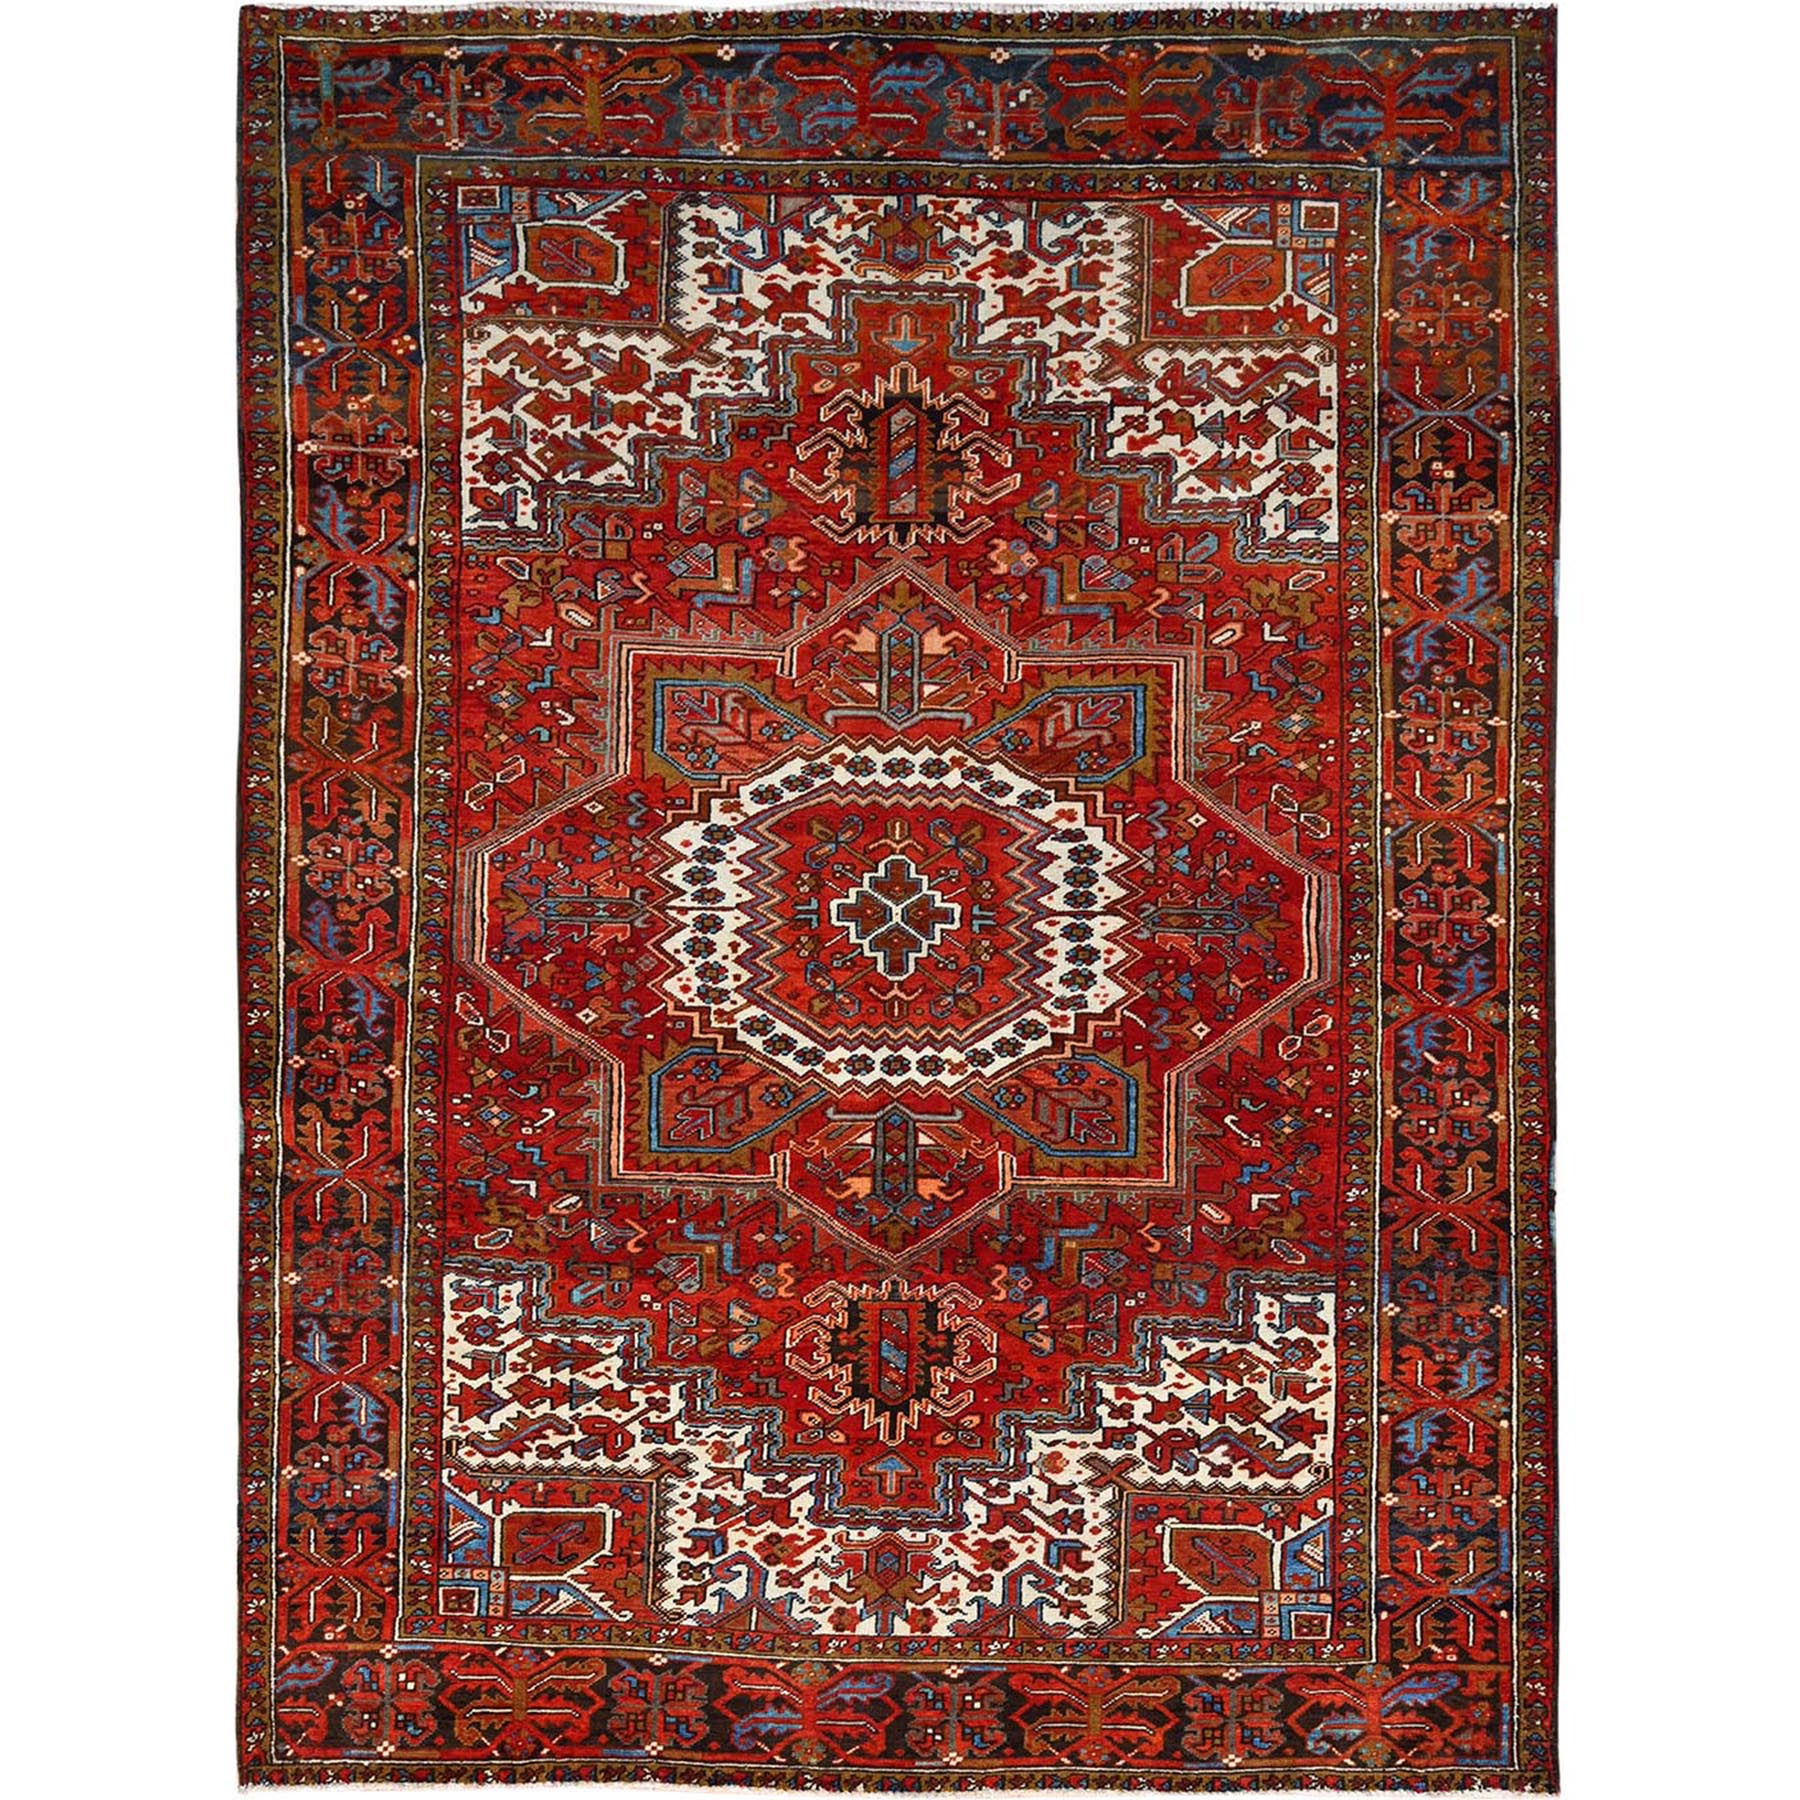 7'7"x10'5" Crimson Red, Evenly Worn, Pure Wool, Hand Woven, Semi Antique Persian Heriz, Good Condition, Distressed Feel, Oriental Rug 